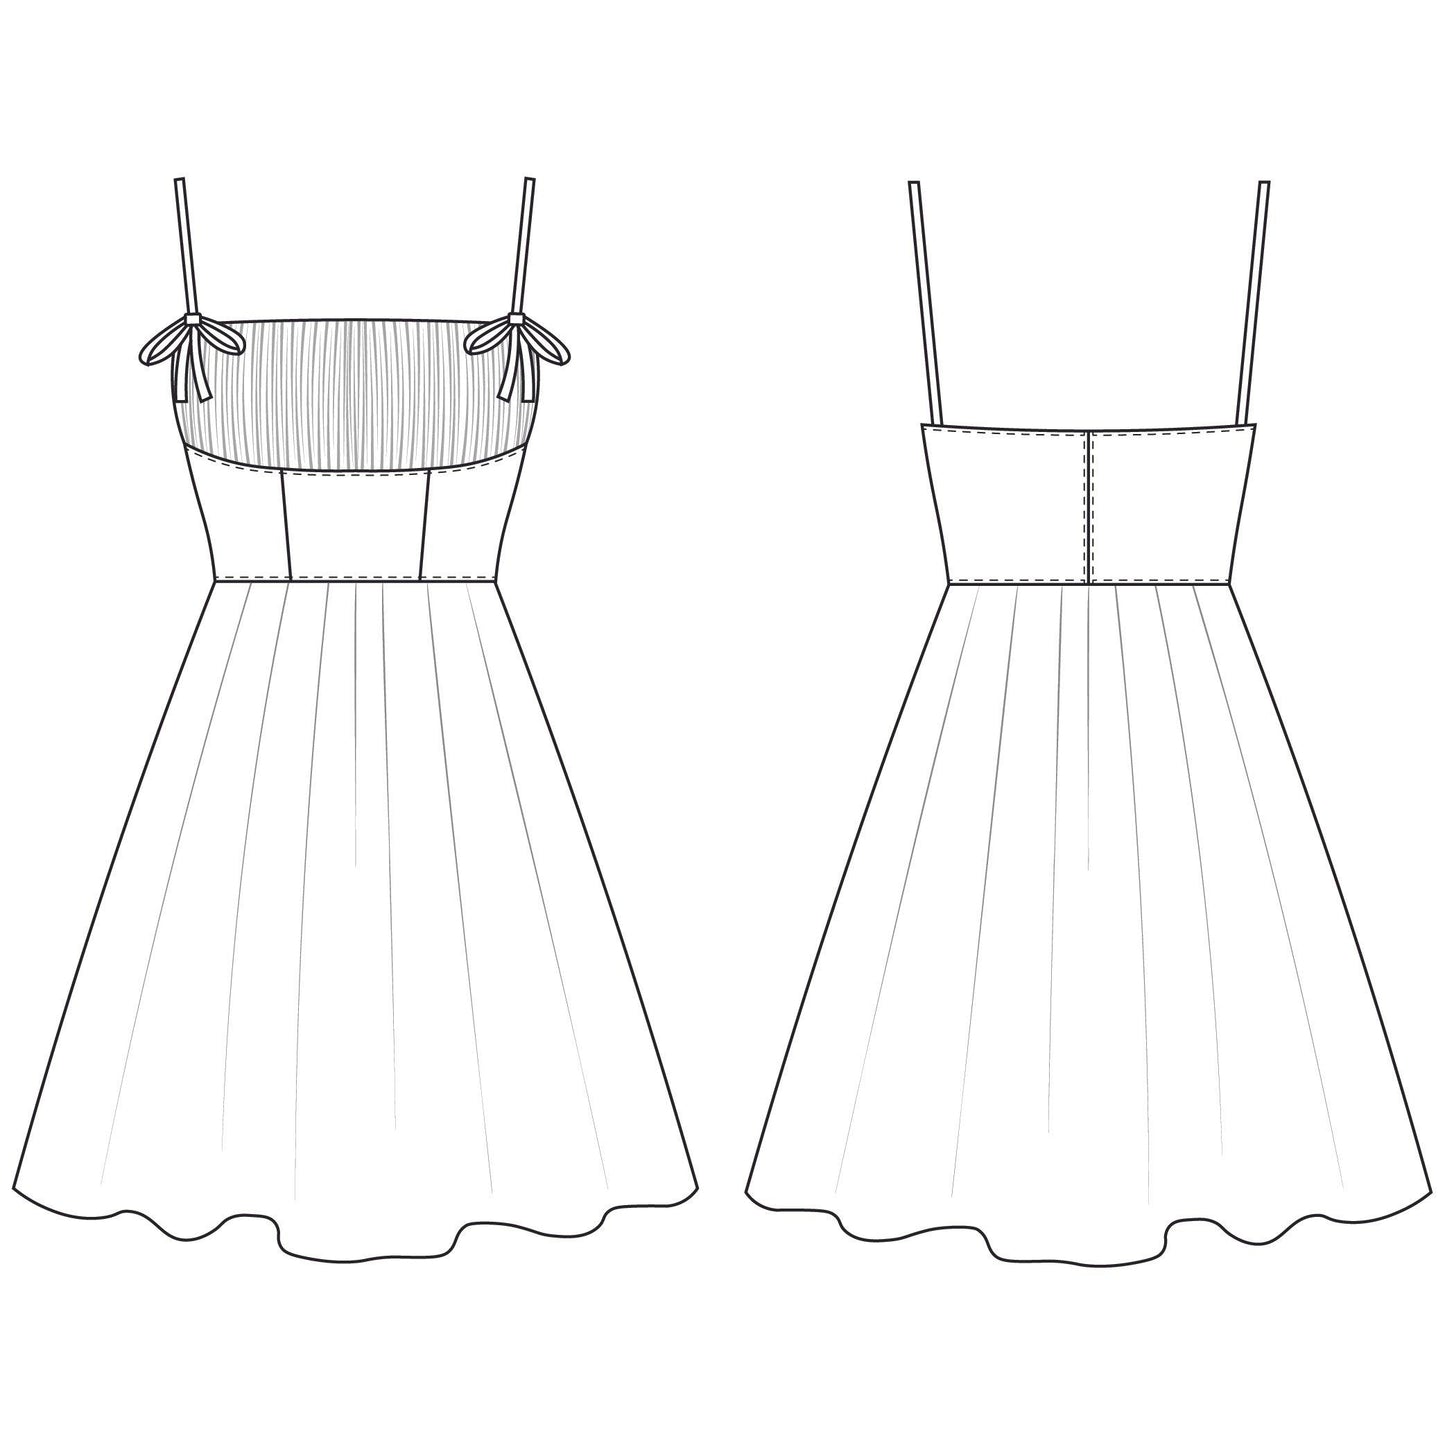 Line drawing front and back views of "Marilyn Monroe Style Bombshell Dress"